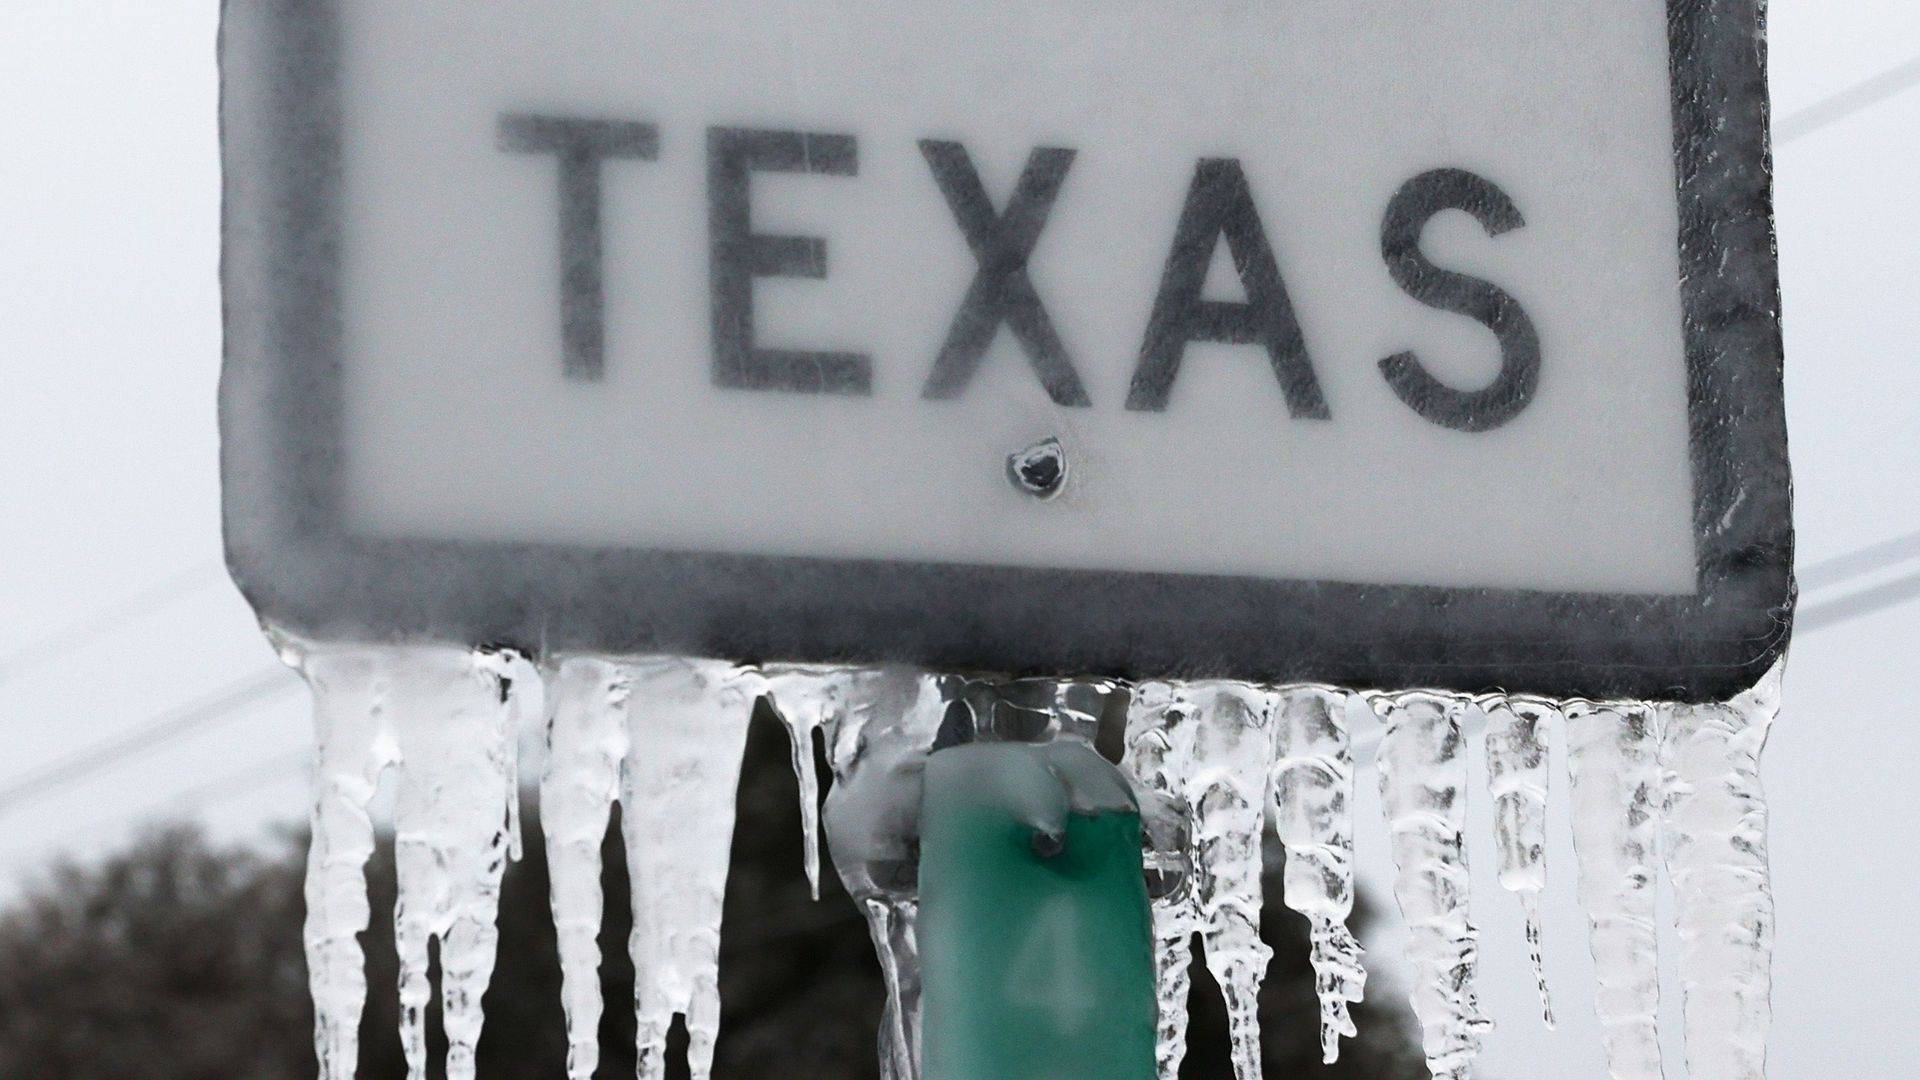 Icicles hang off the State Highway 195 sign yesterday in Killeen, Texas.